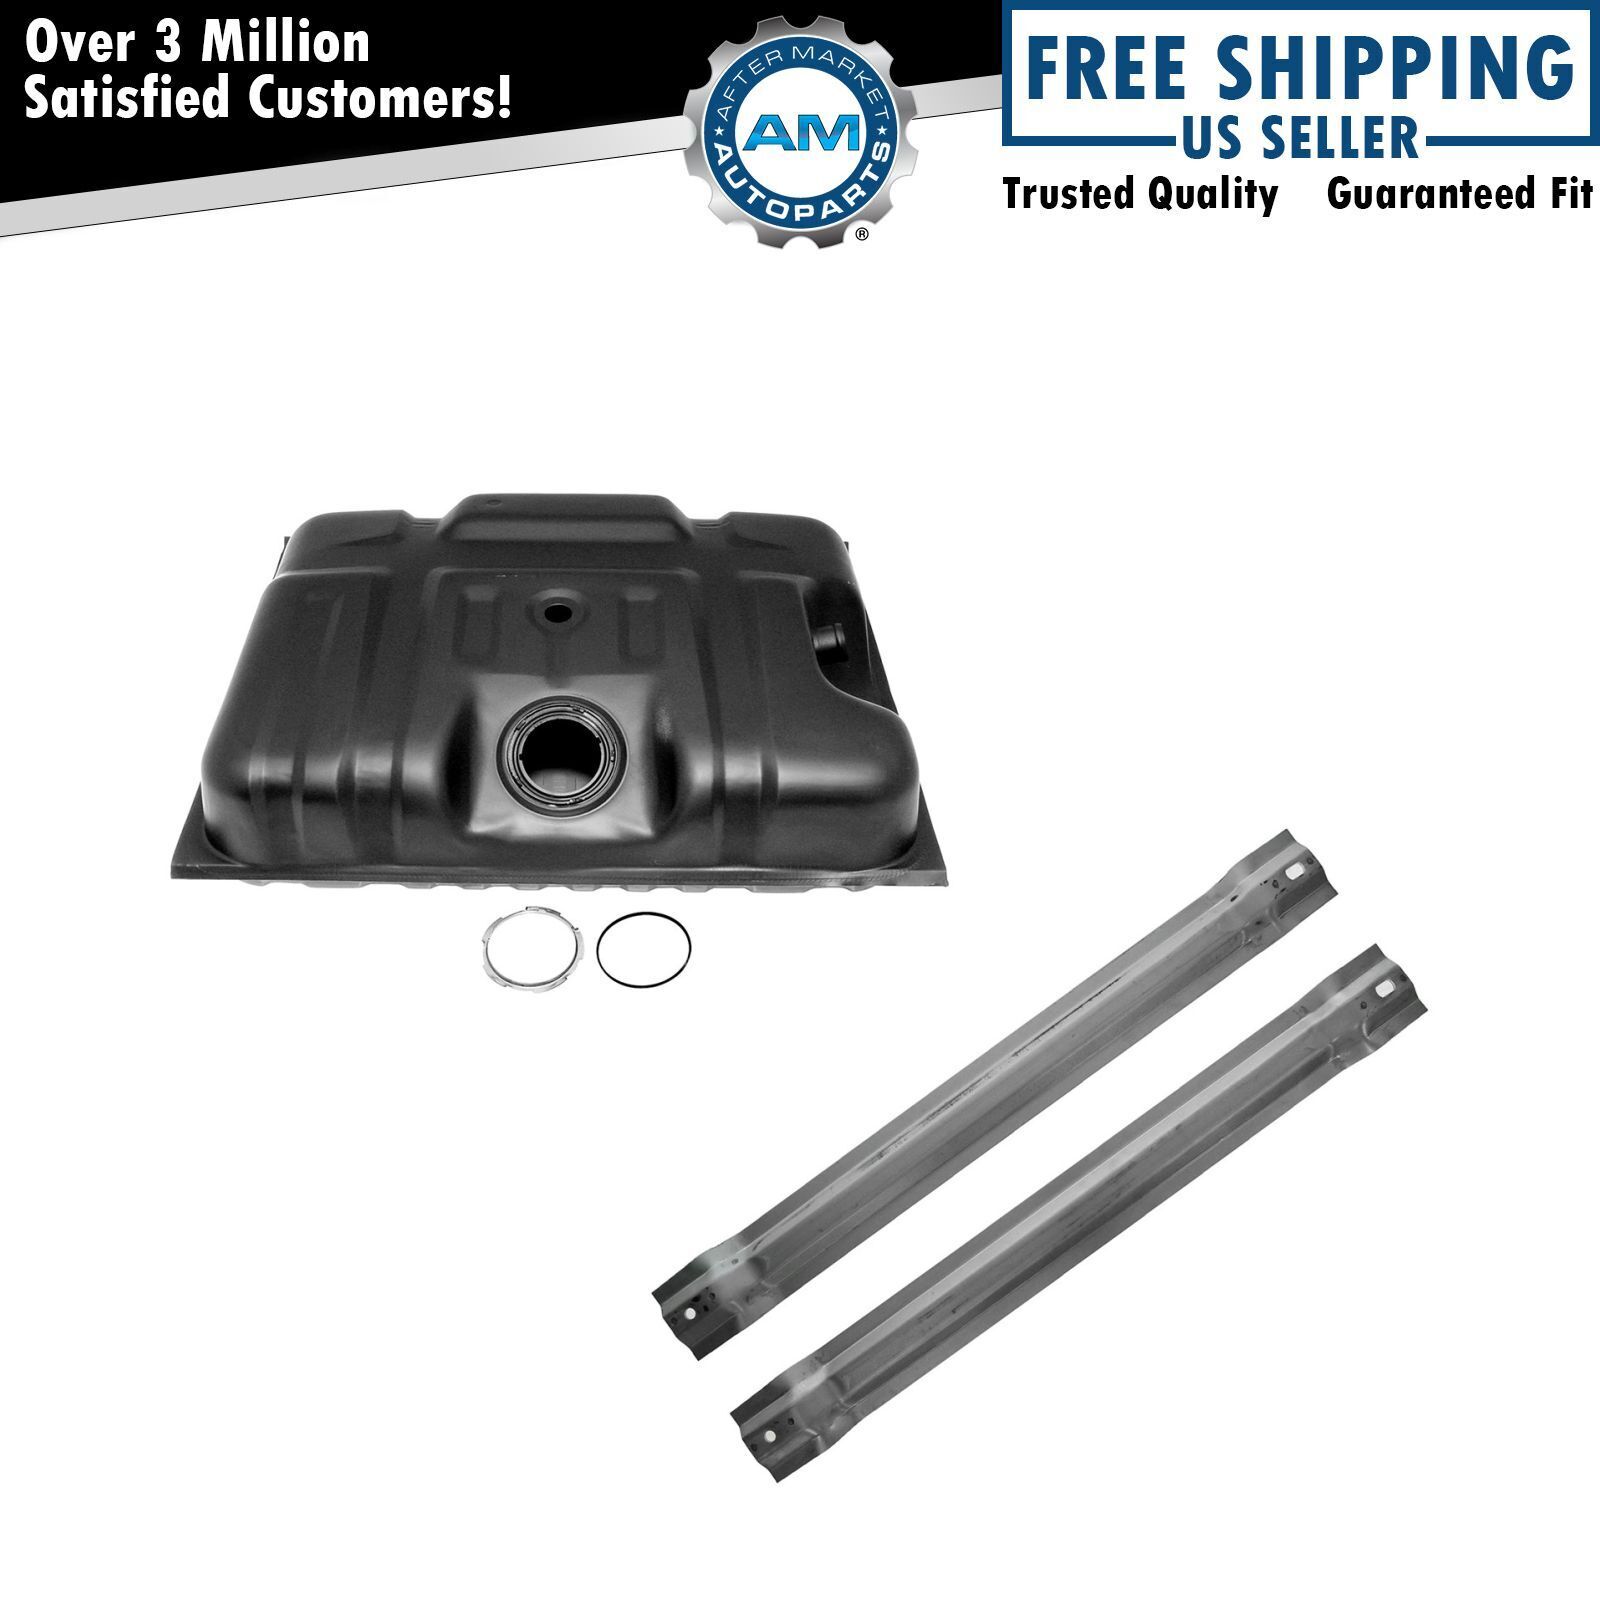 Fuel Gas Tank w/ Straps Kit Set 18 Gallon NEW for Ford F-Series Pickup Truck